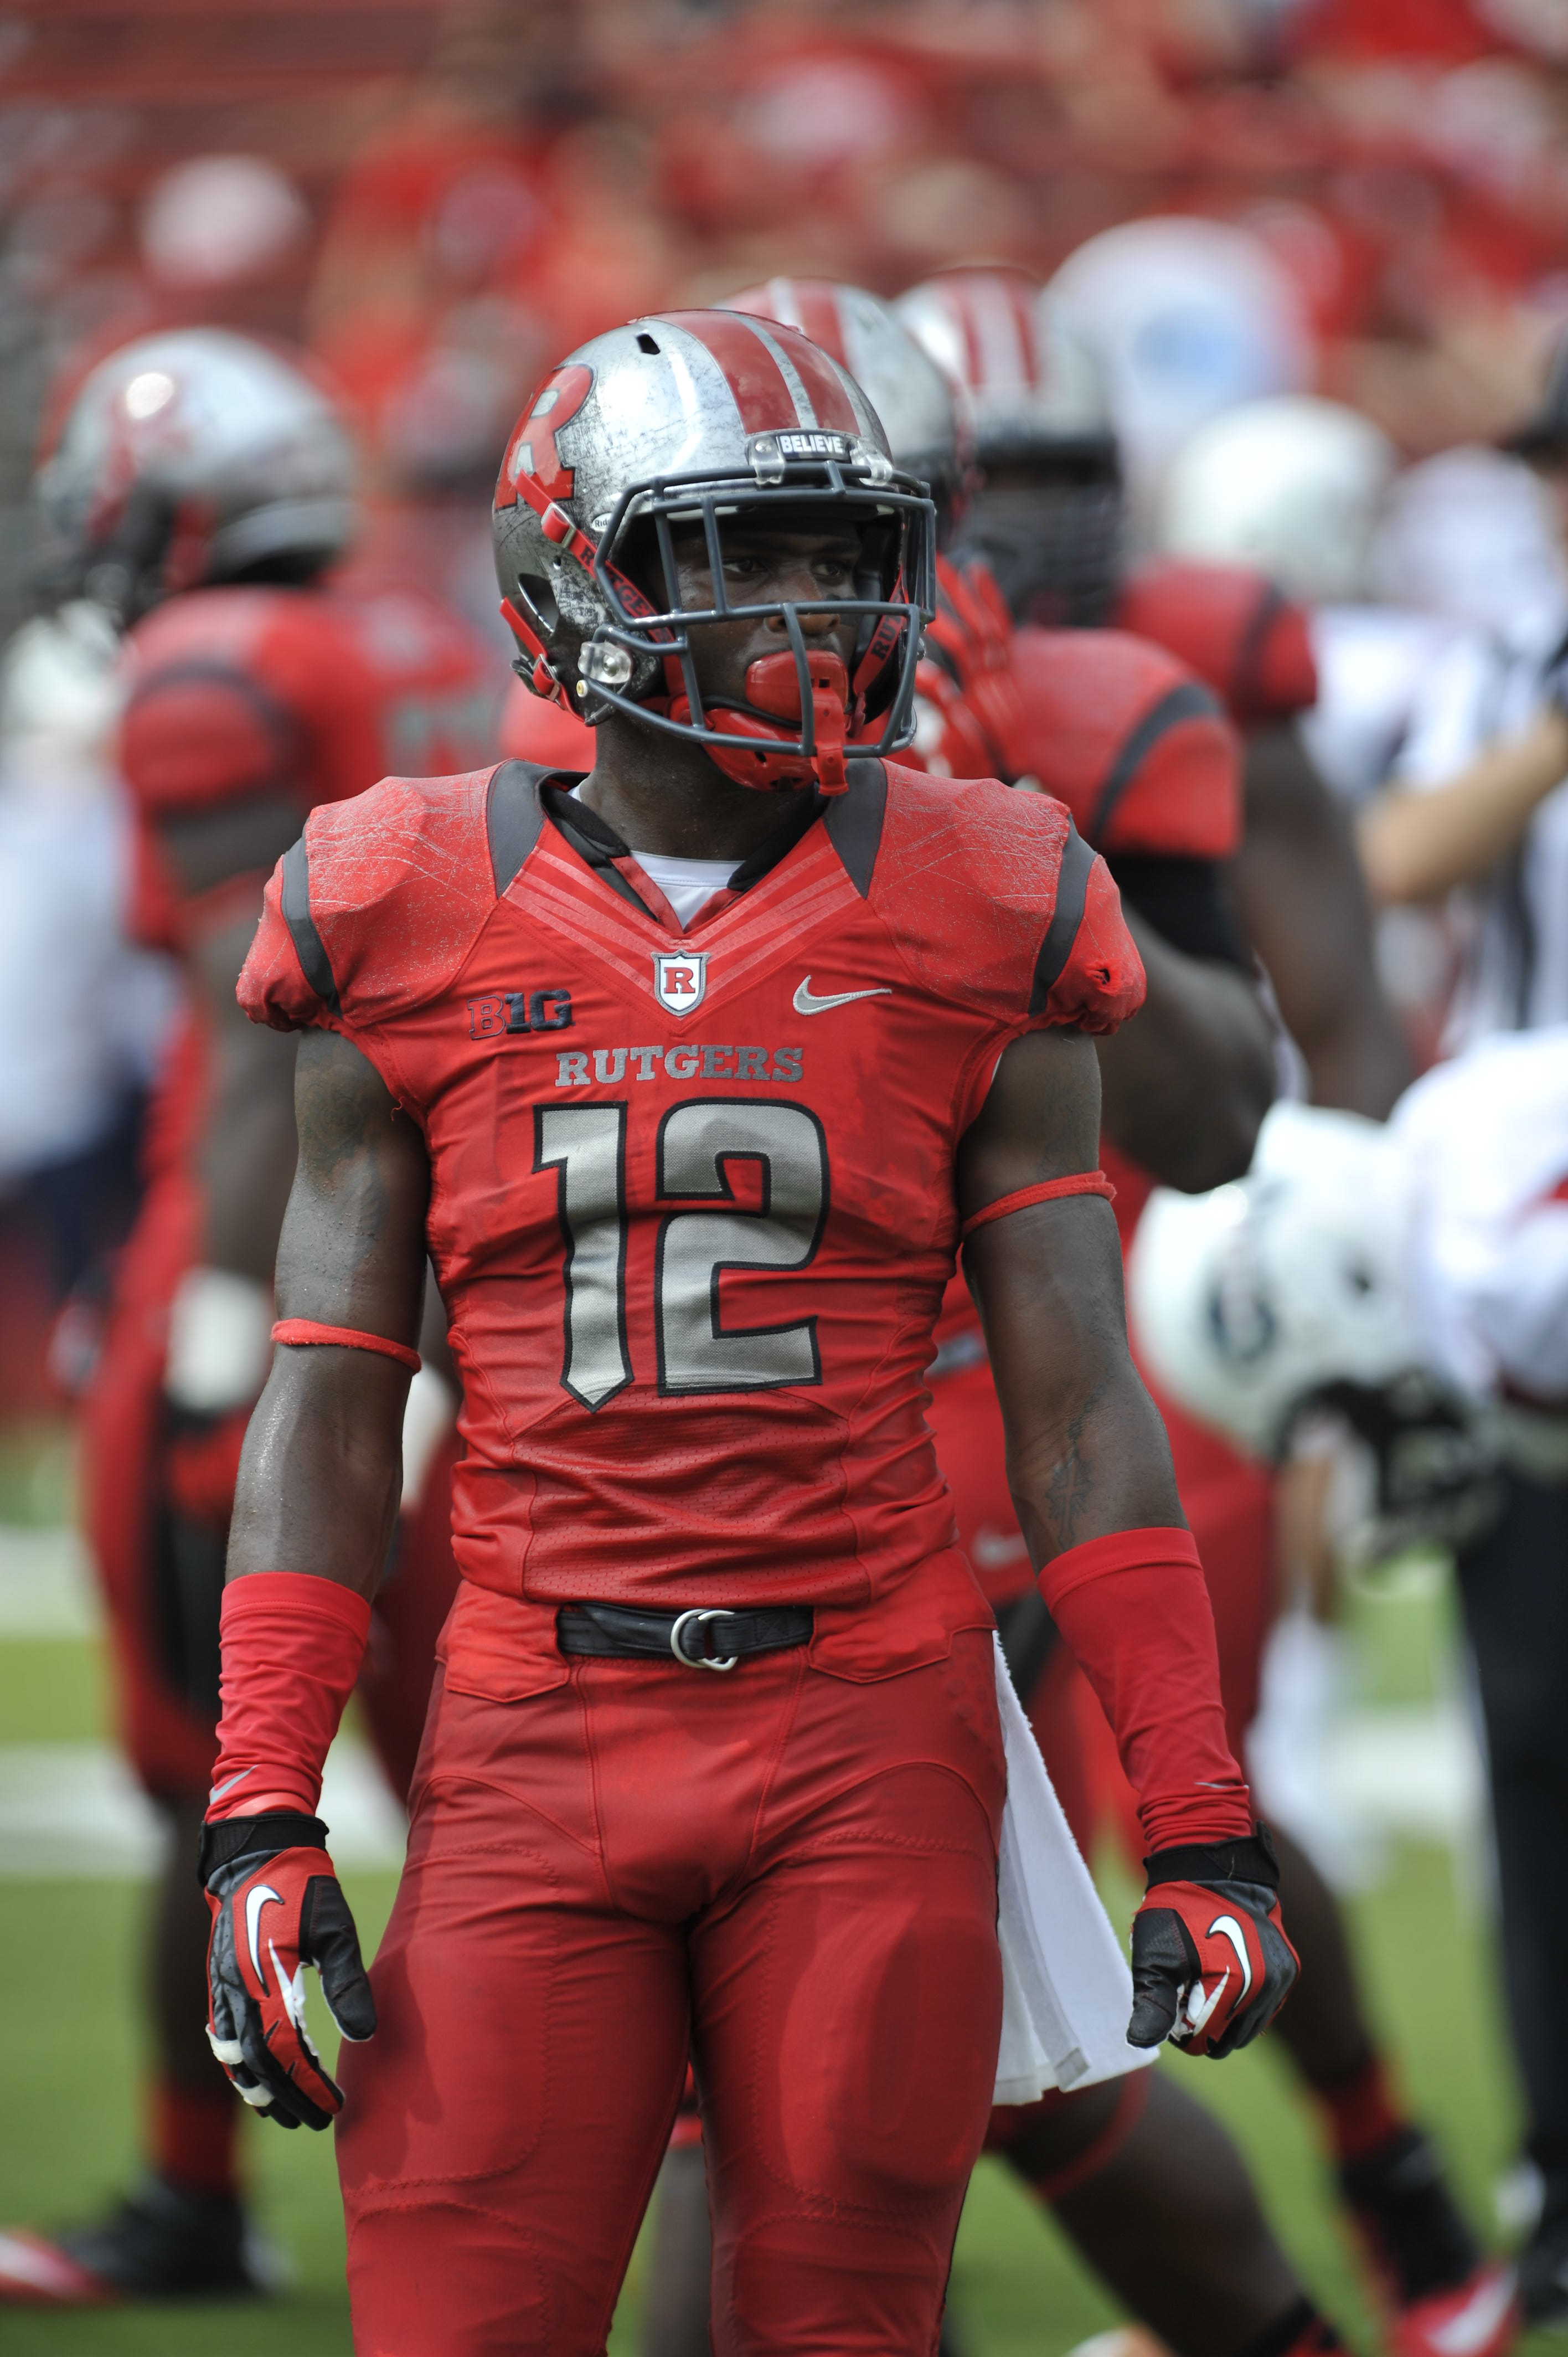 Rutgers' cornerback Nadir Barnwell during NCAA football action between the Rutgers Scarlet Knights and the Howard University Bison at High Point Solutions Stadium in Piscataway, N.J. on Sept. 6, 2014. (Duncan Williams—AP)